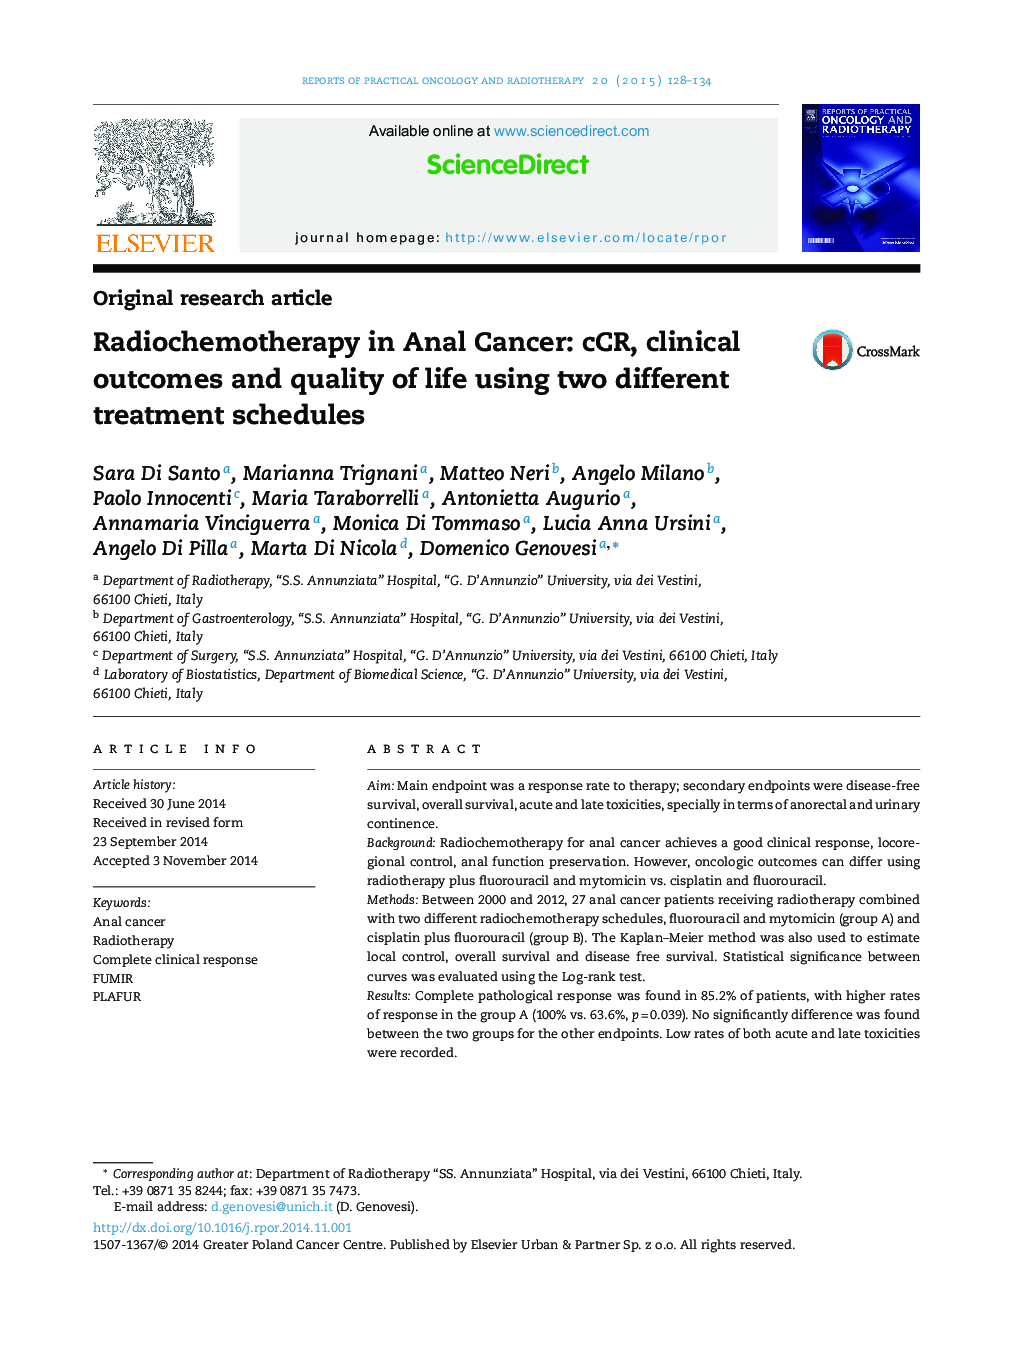 Radiochemotherapy in Anal Cancer: cCR, clinical outcomes and quality of life using two different treatment schedules